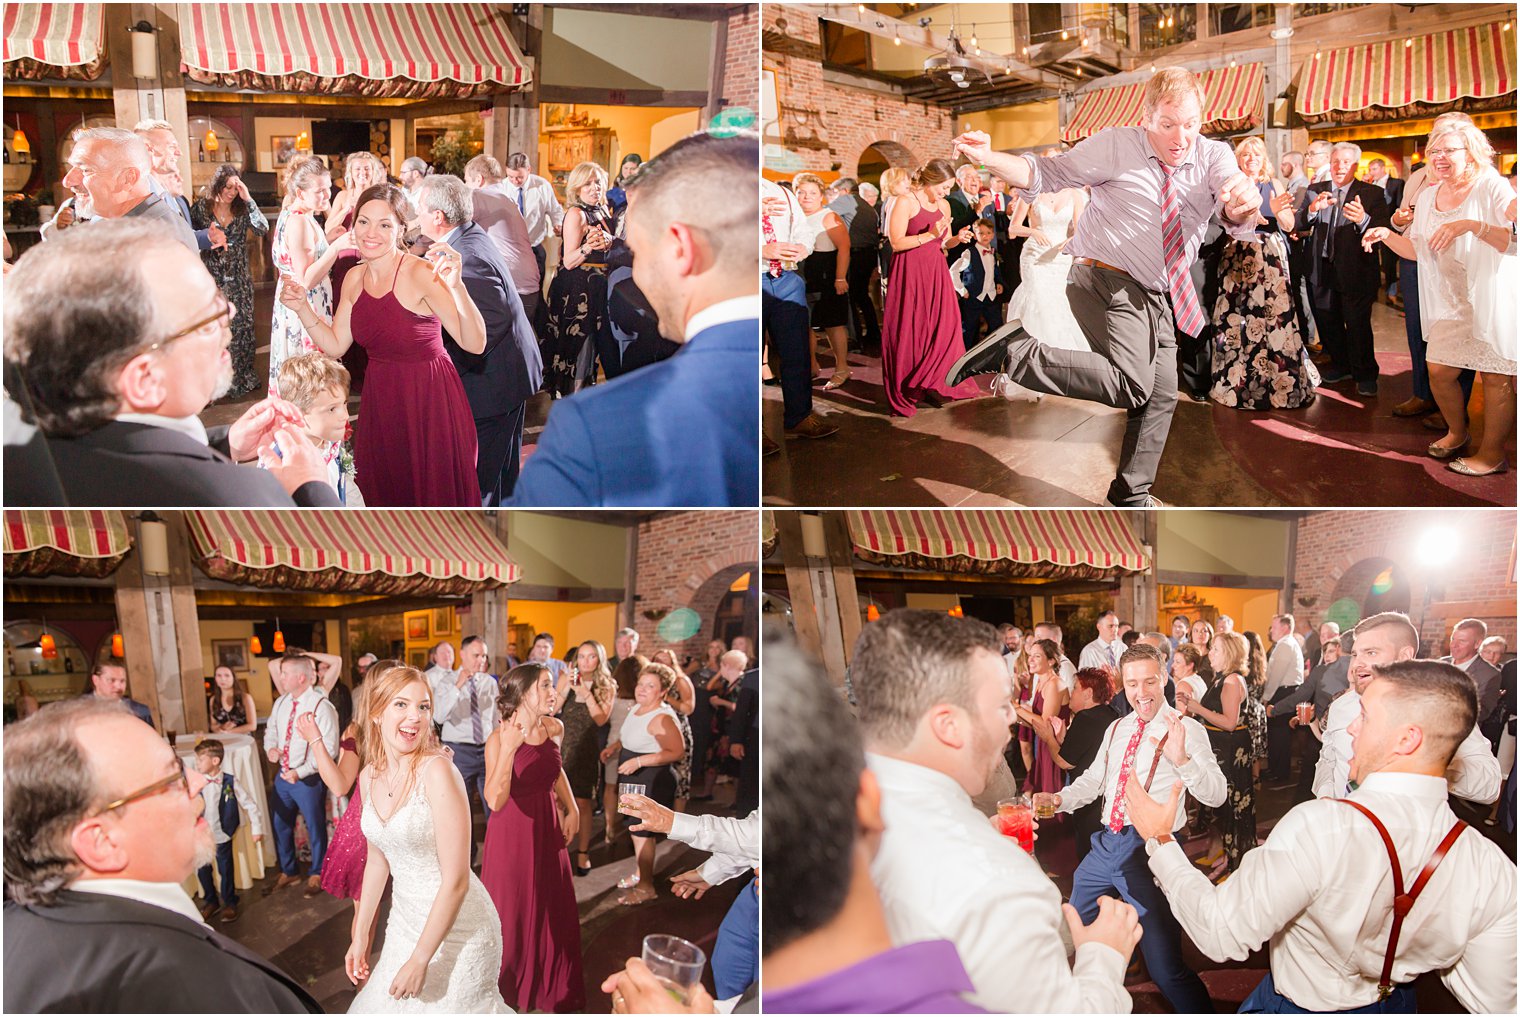 Guests on dance floor at Laurita Winery